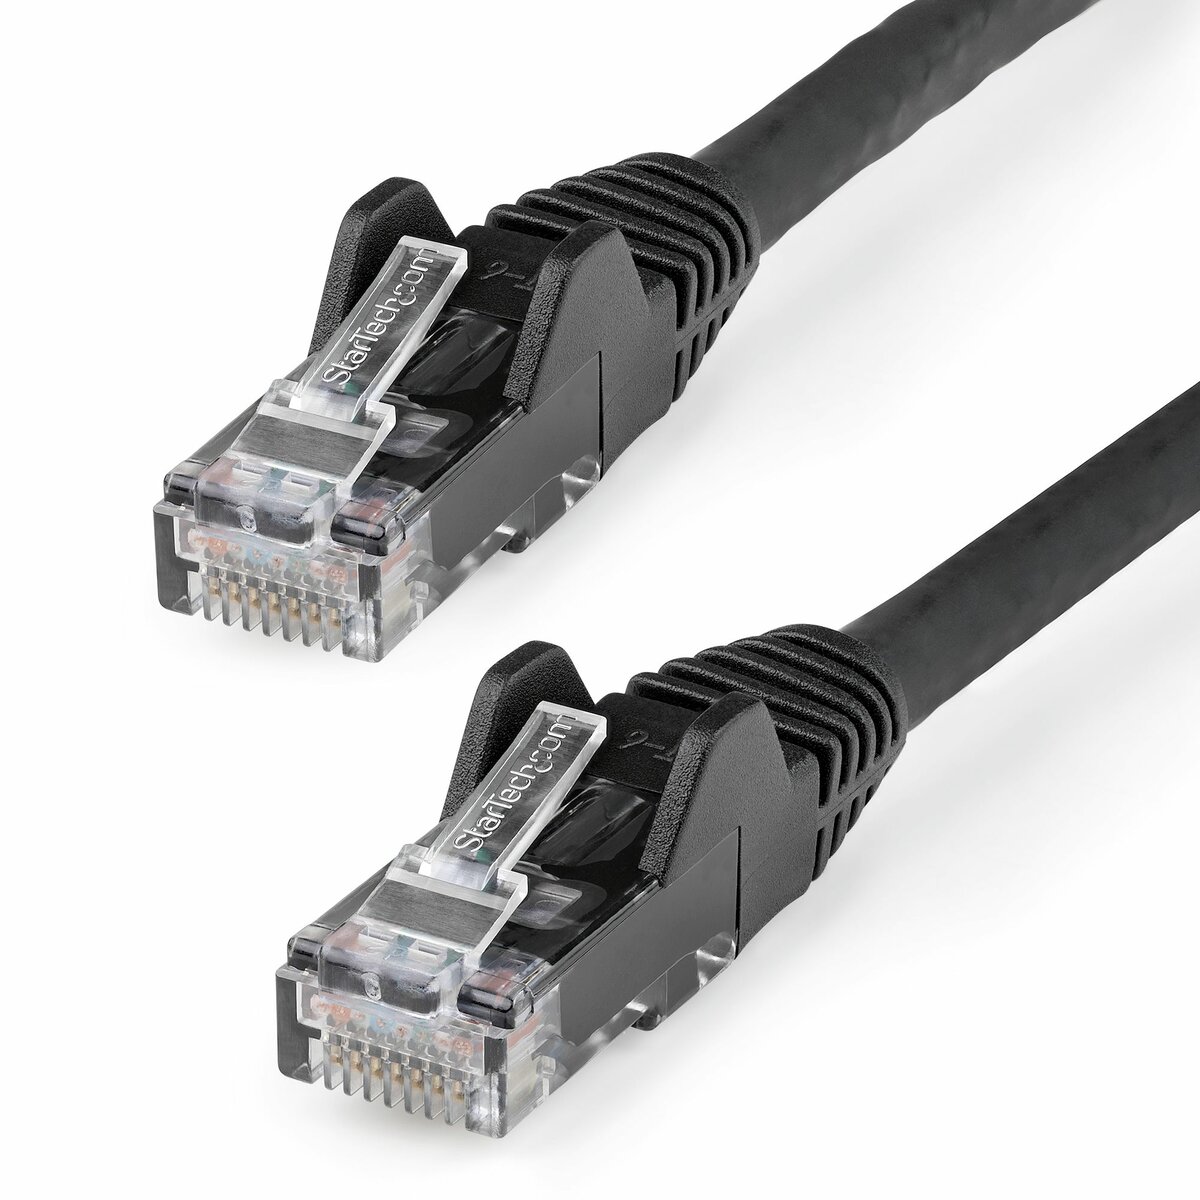 ESSAGER 10m Ethernet Cable CAT6 1000Mbps Gigabit Network Cable RJ45 High  Speed Transmission Cord - Round Wire